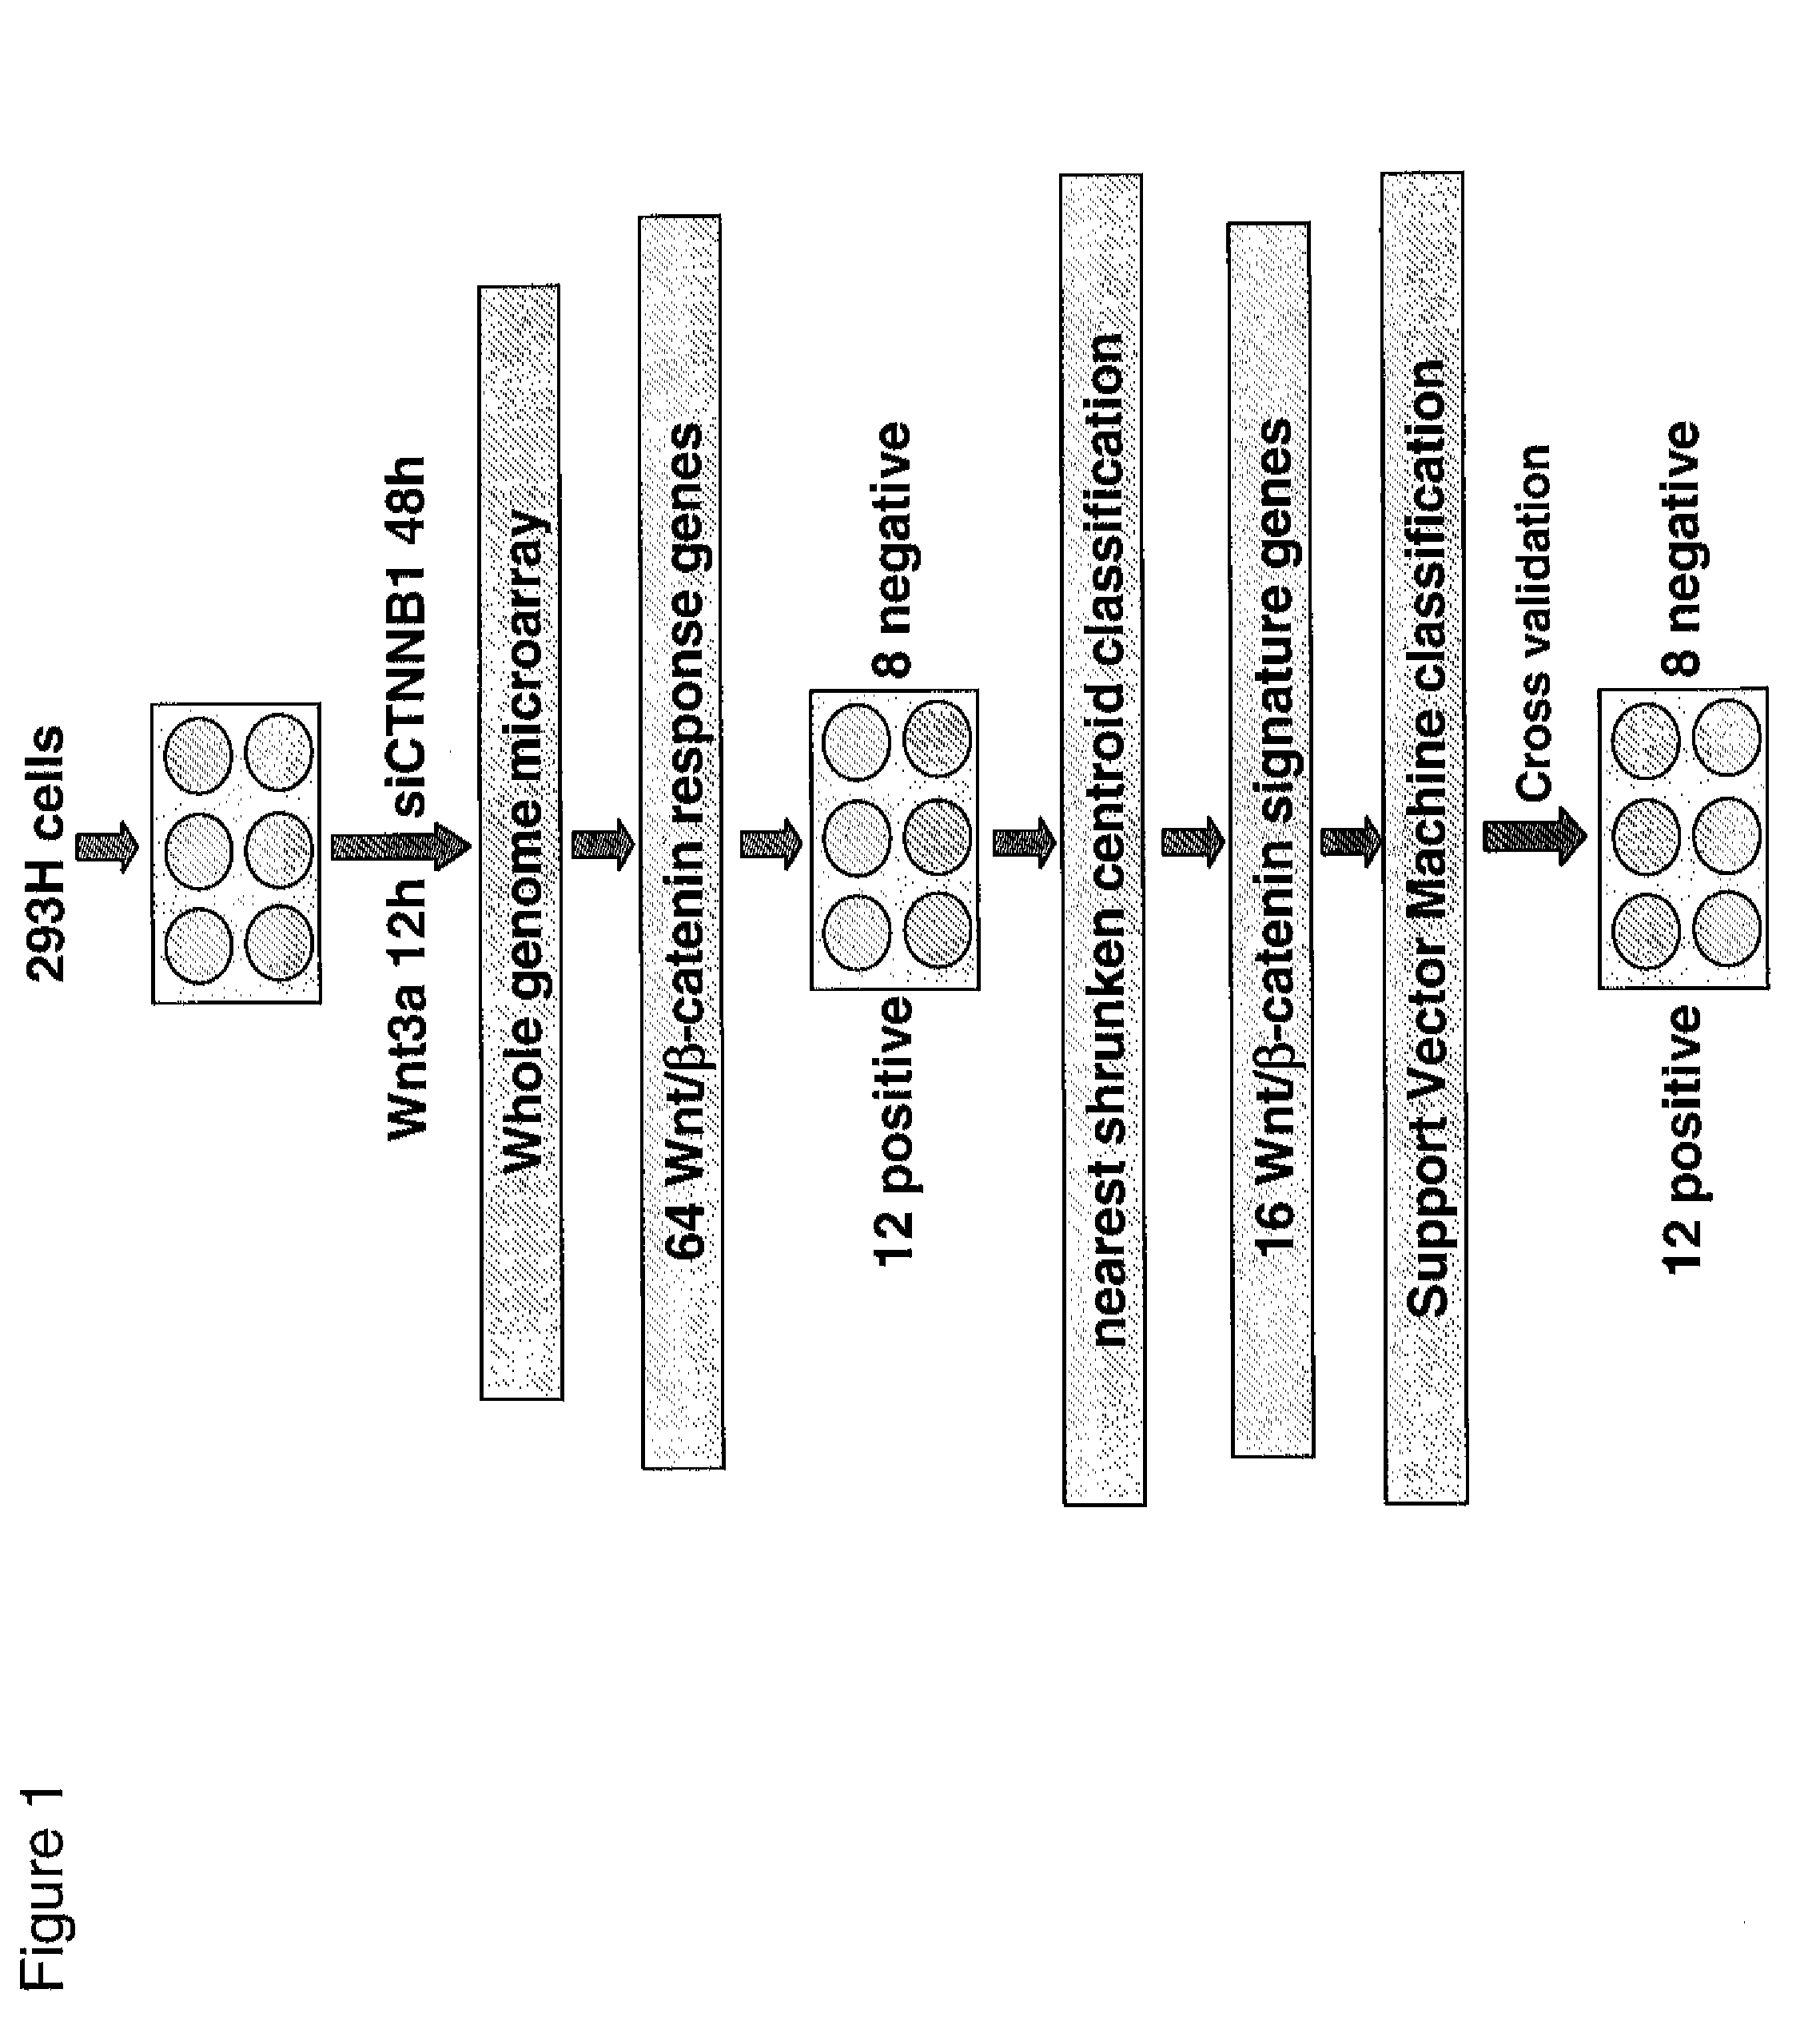 Gene expression signature for wnt/b-catenin signaling pathway and use thereof